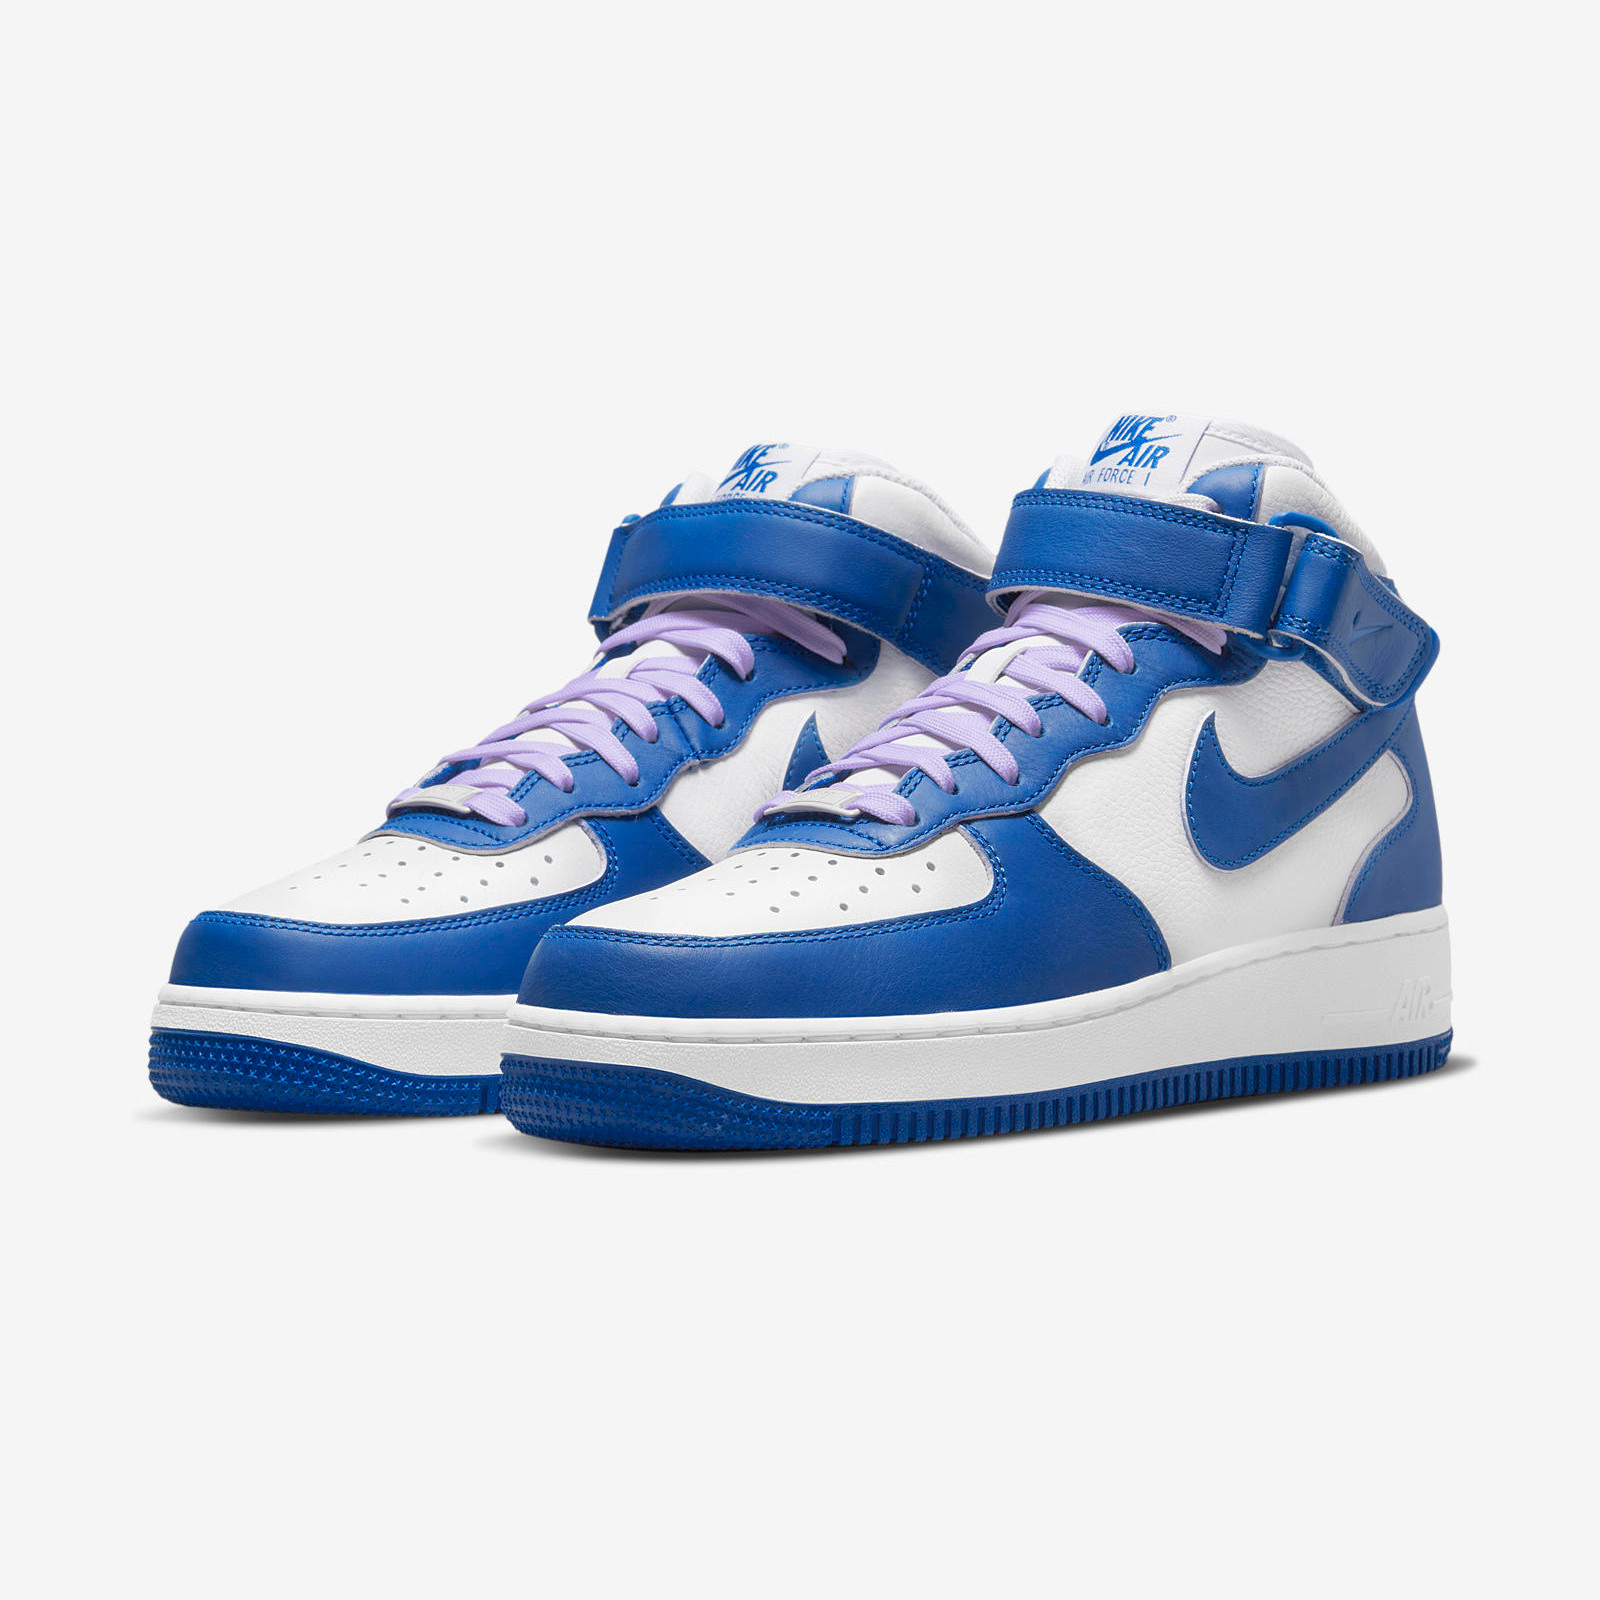 Nike Air Force 1 Mid
« Military Blue »